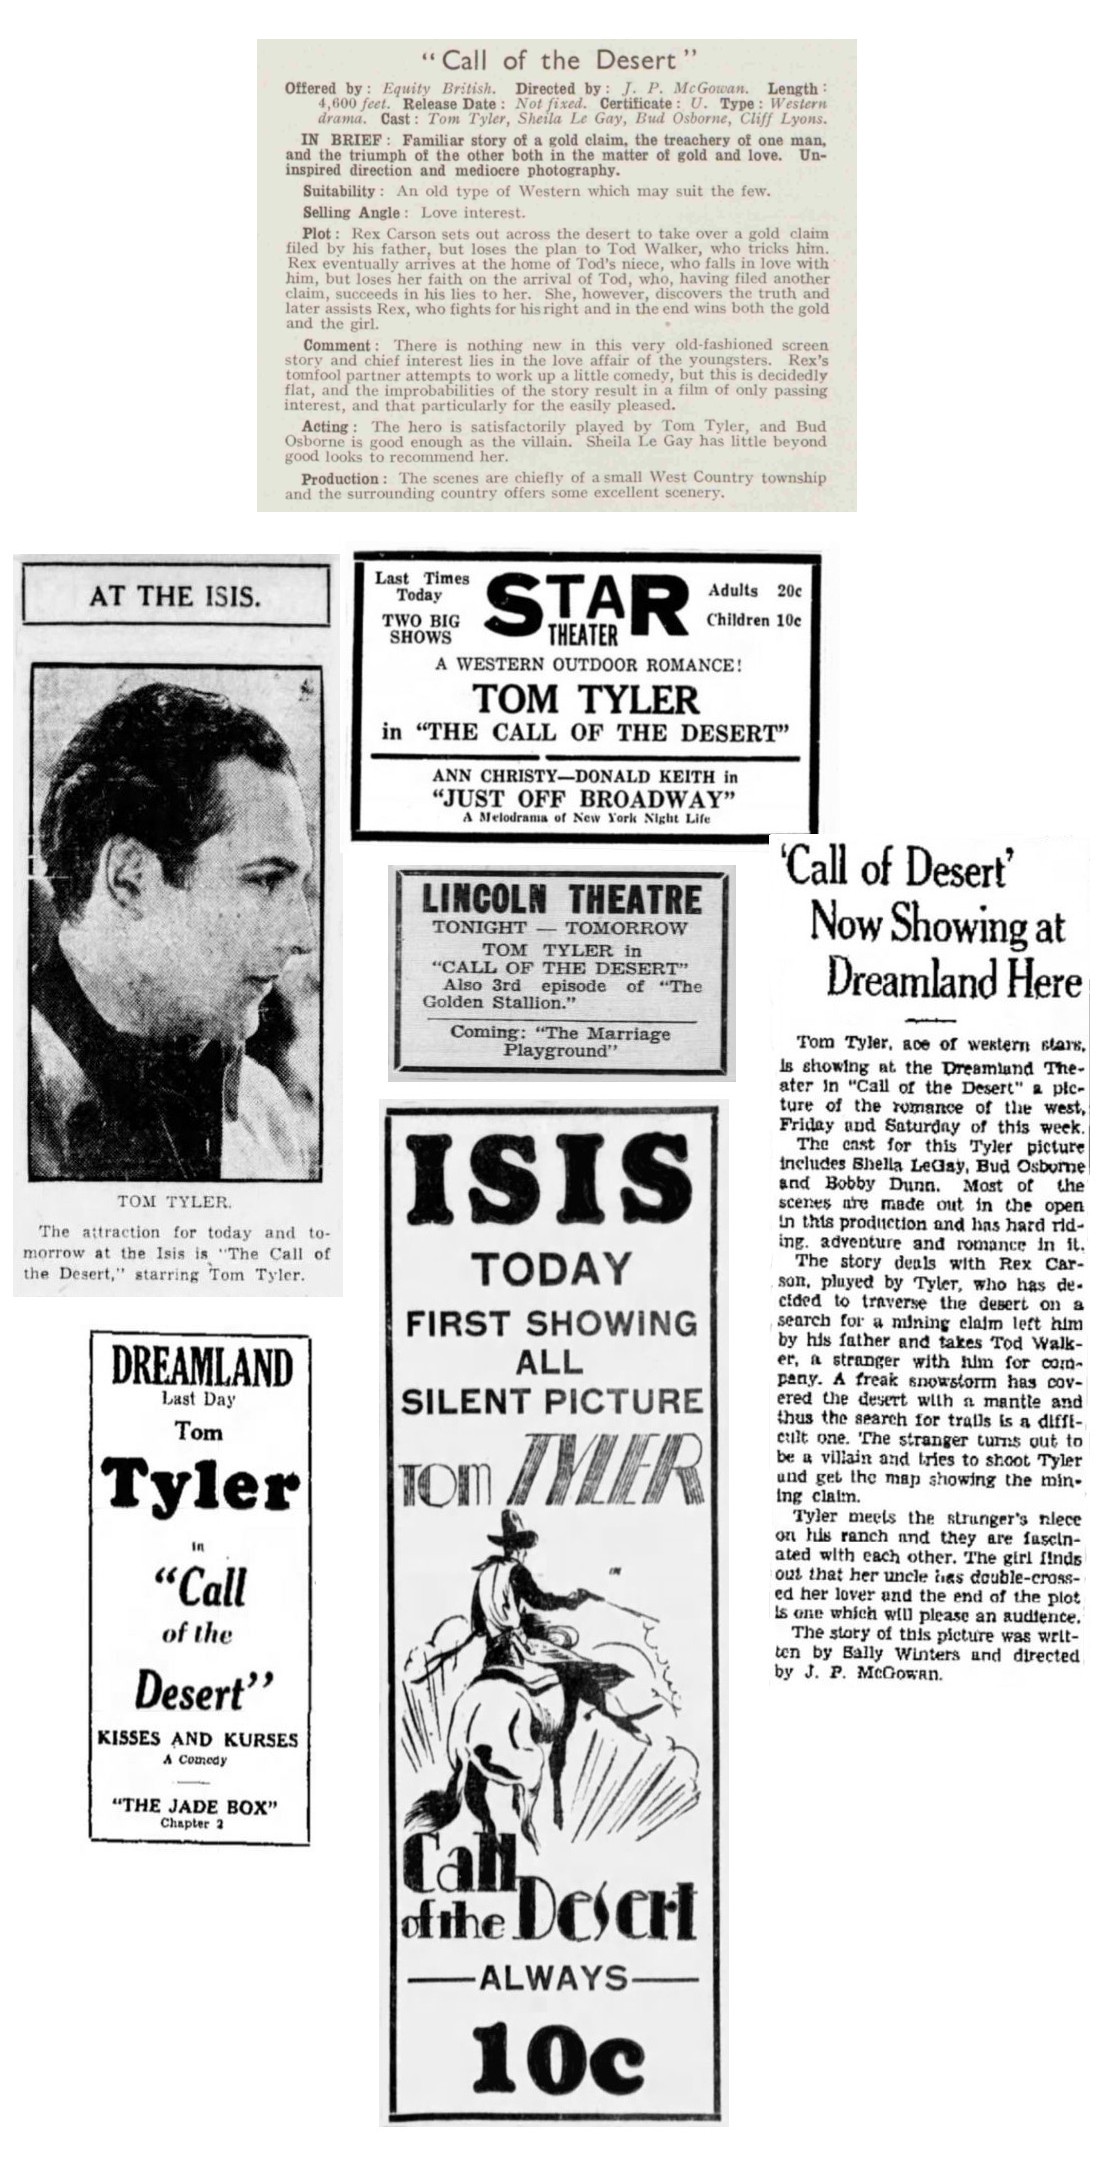 Call of the Desert cinema ads film review picture of Tom Tyler